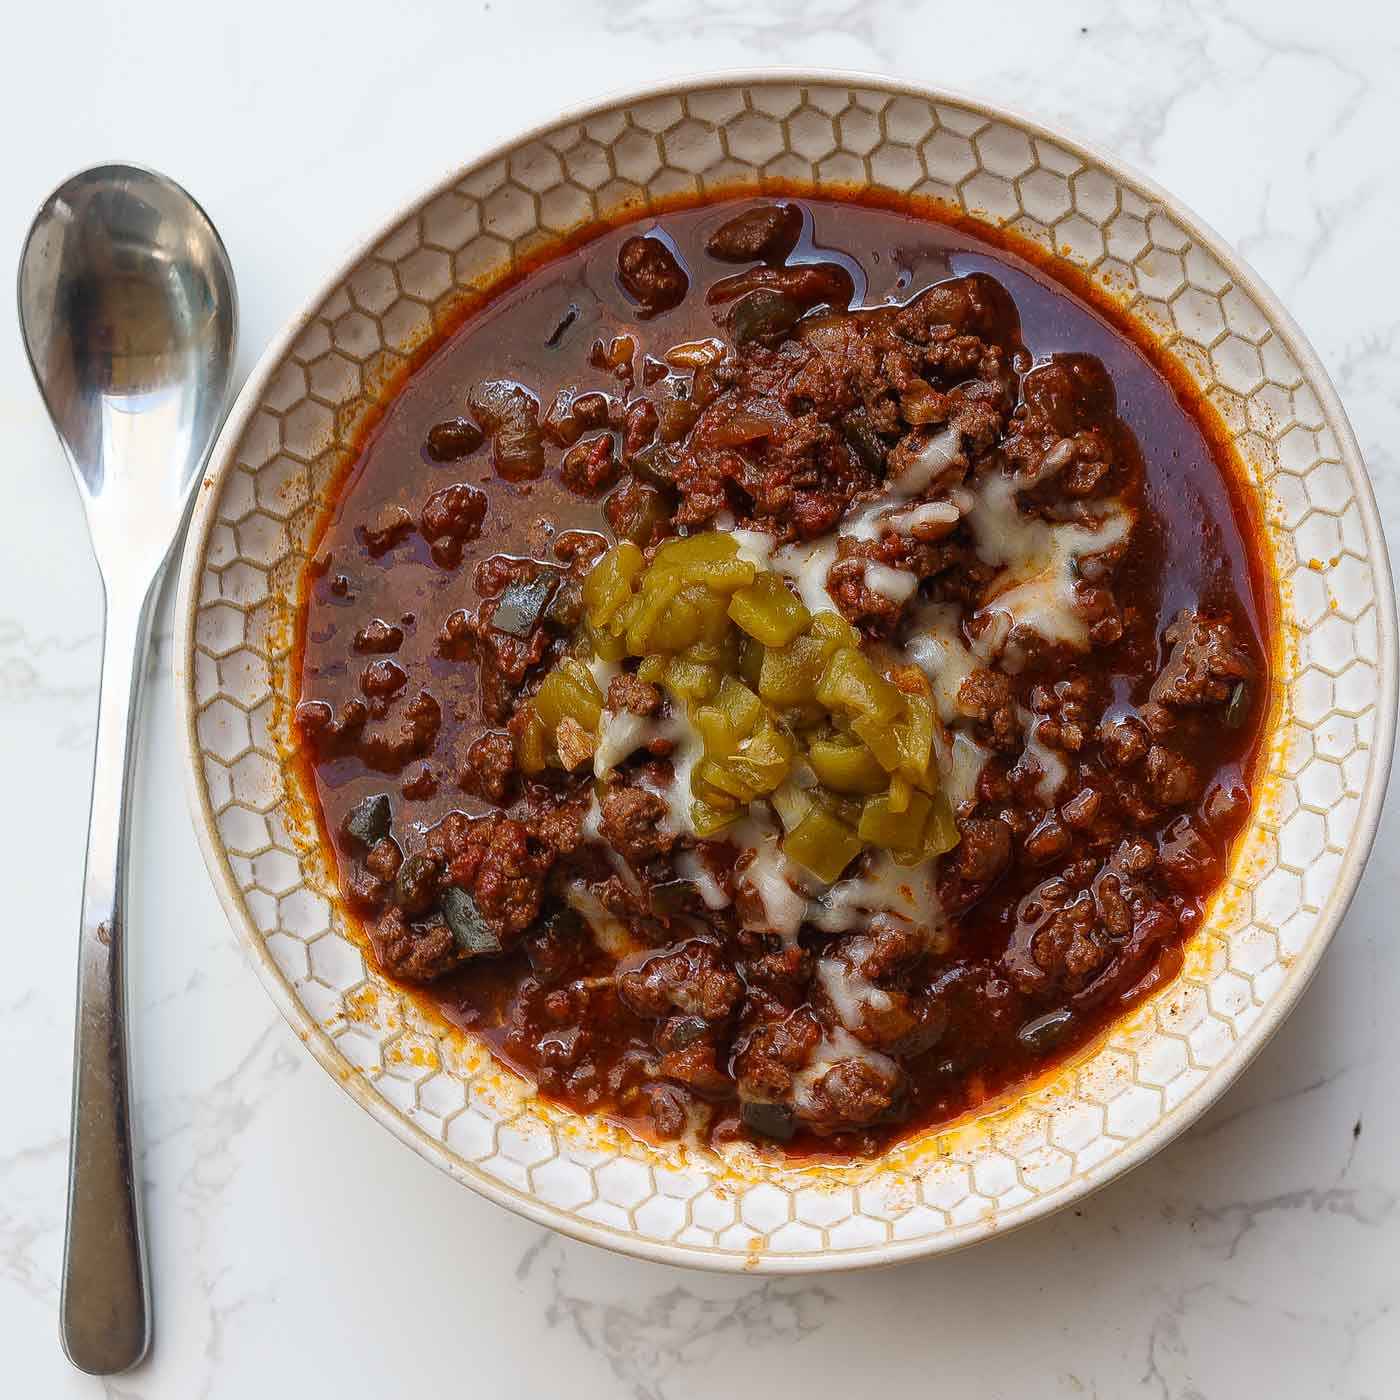 Deer Chili Recipe With Beer: A Hearty and Flavorful Delight!